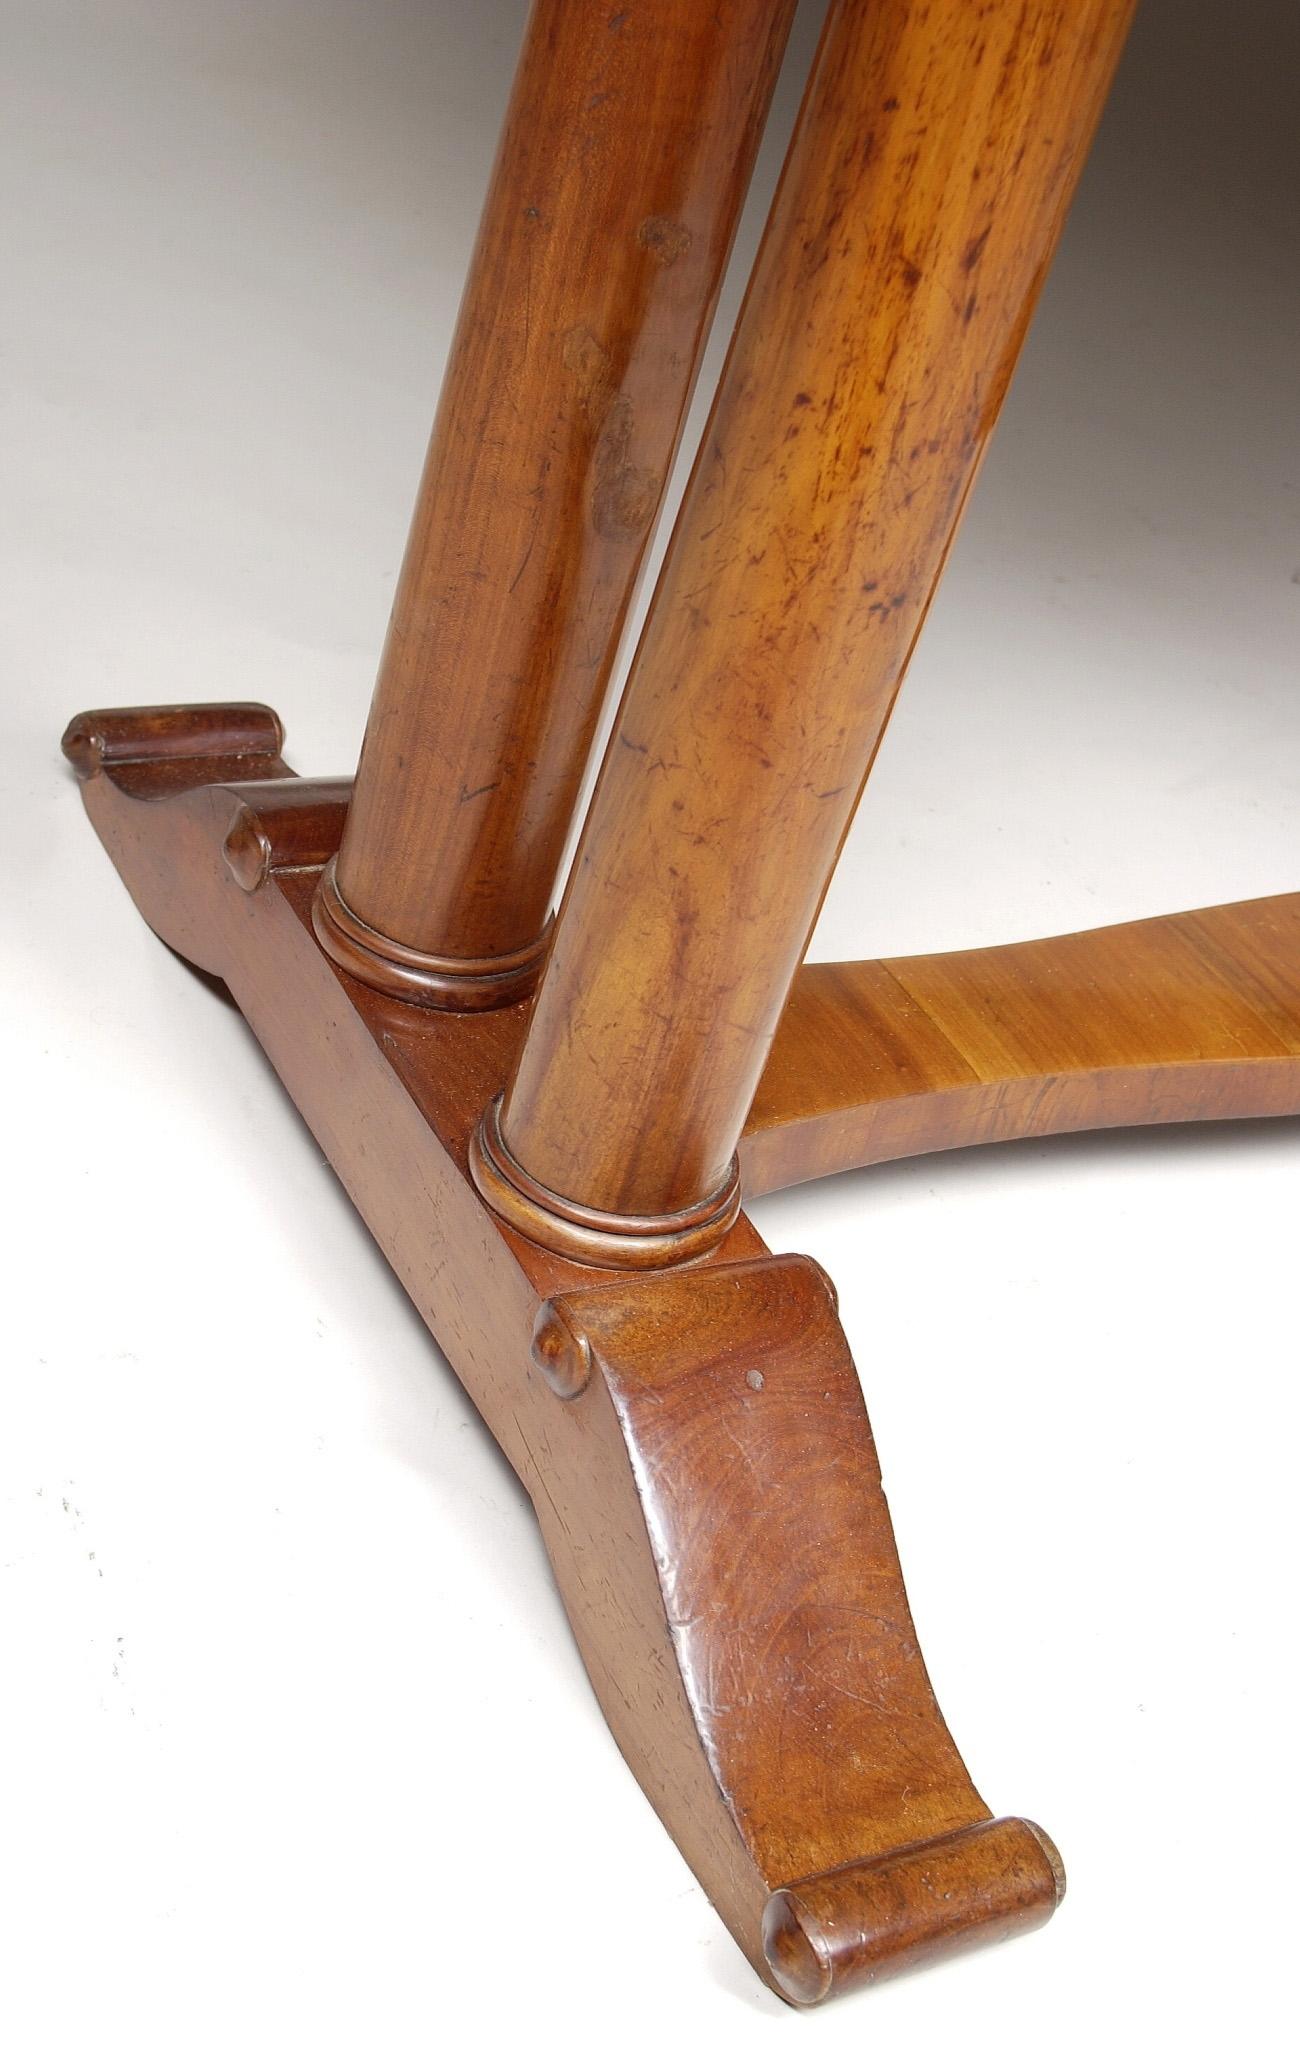 Biedermeier table
Completely restored.
Shellac polish.
Material: Mahogany
Source: Germany
Period: 1820-1829.